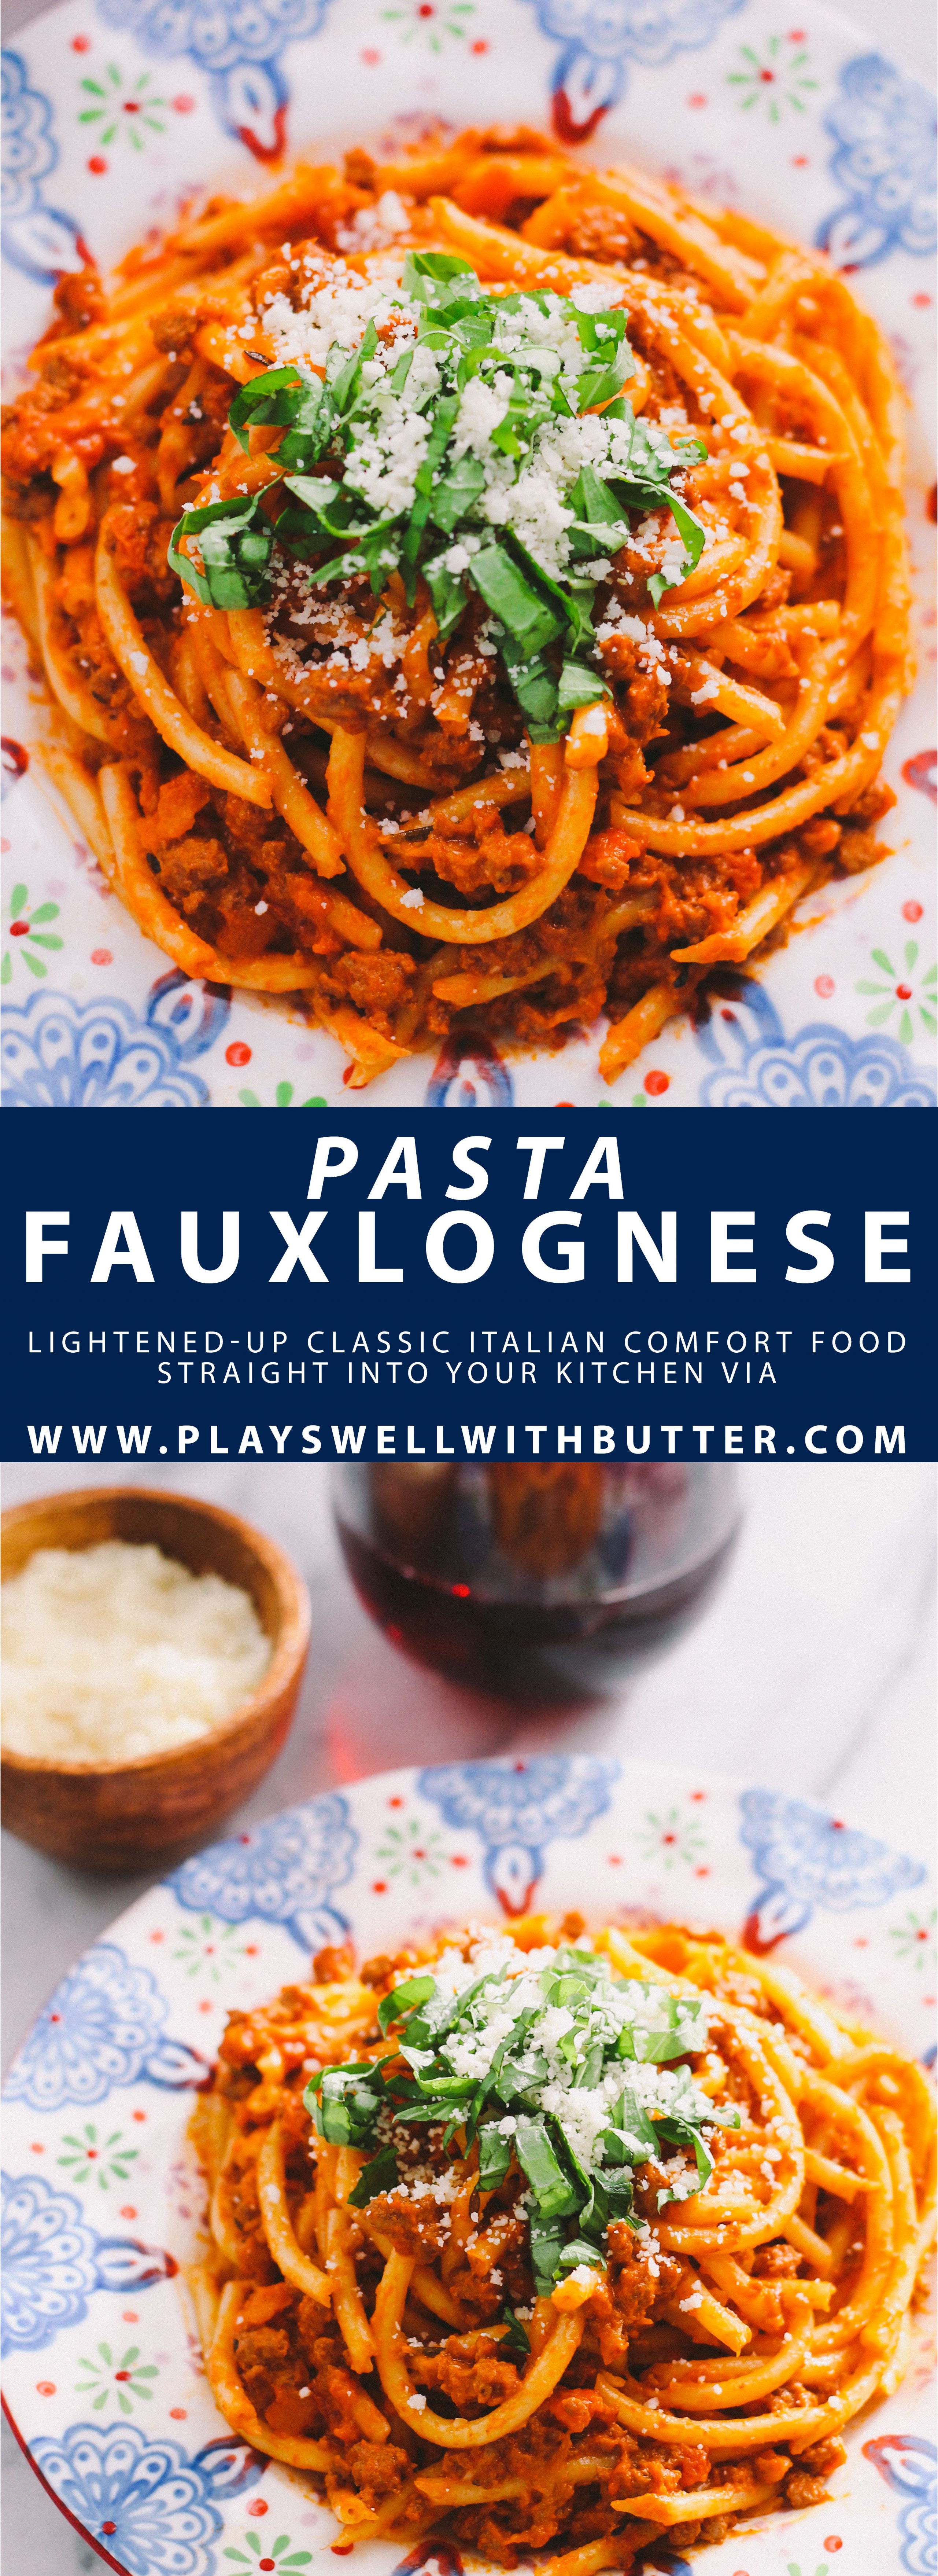 Two pictures of pasta fauxlognese made with grounnd turkey. A blue box with white text overlay reads: pasta fauxlognese, lightened-up classic Italian comfort food straight into your kitchen via www.playswellwithbutter.com